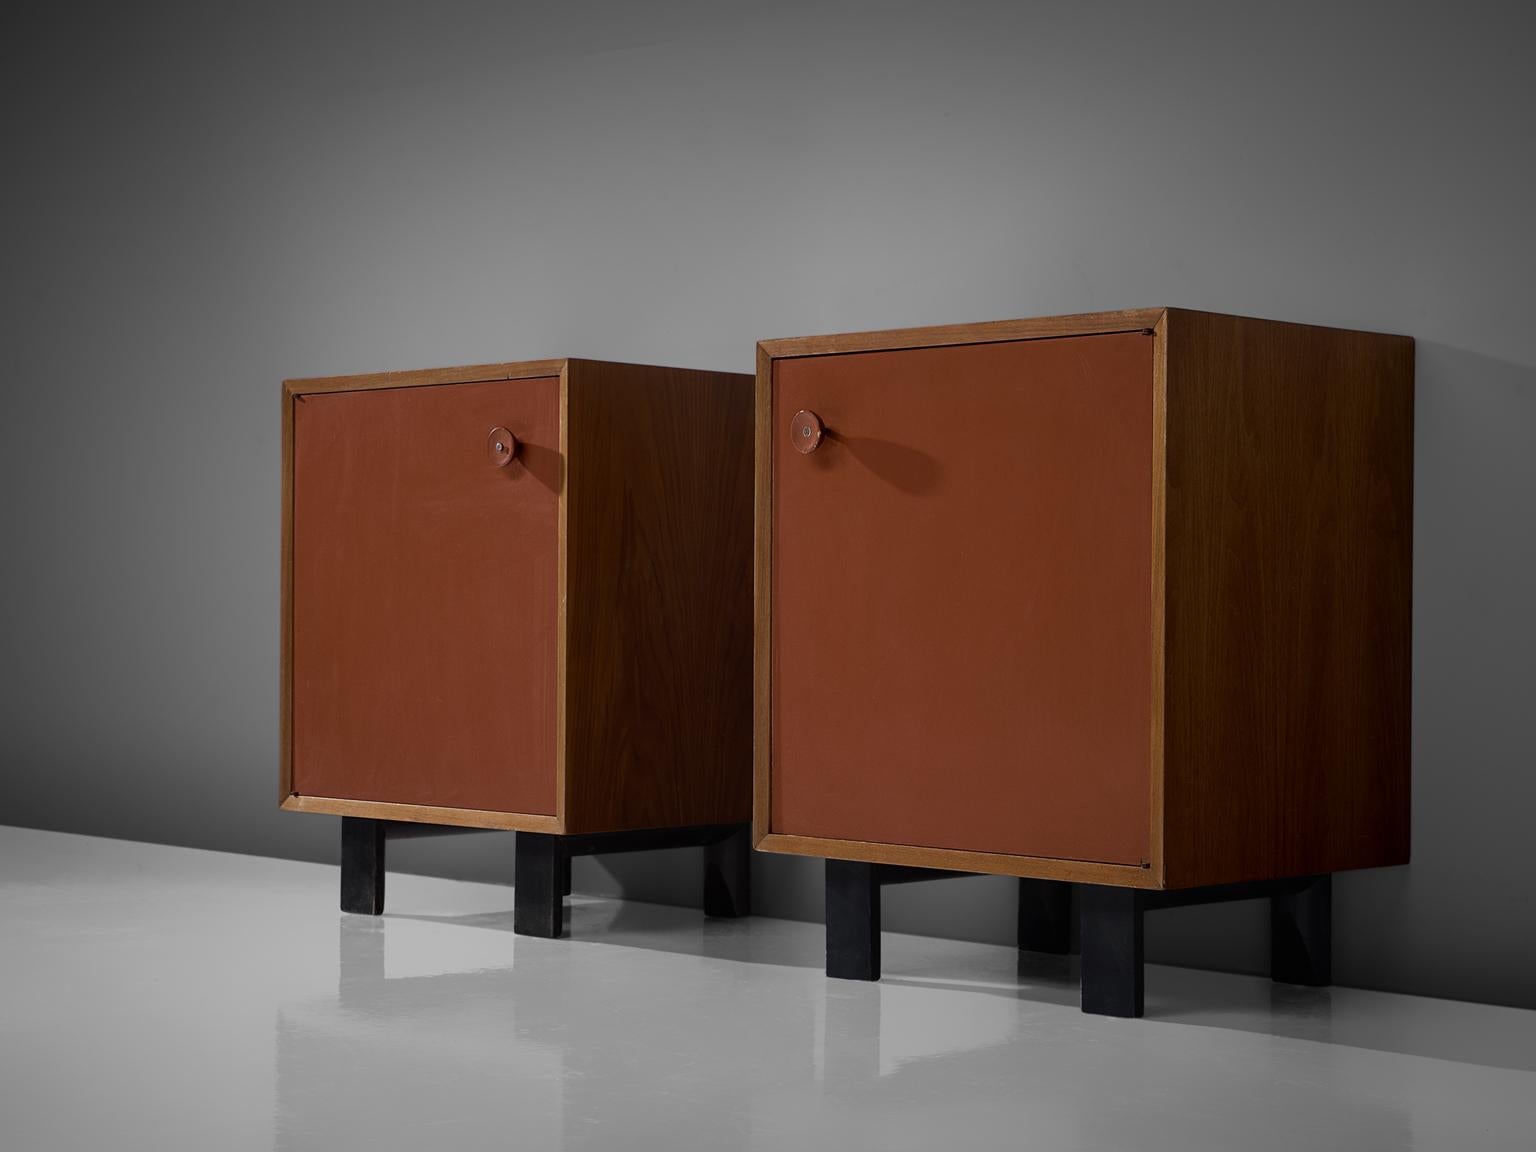 George Nelson for Herman Miller Zeeland Michigan, set of two cabinets in teak and patinated black wood, United States, 1950s. 

This set of cabinets present patinated red color doors, which blend nicely with the light color of the teak. On the